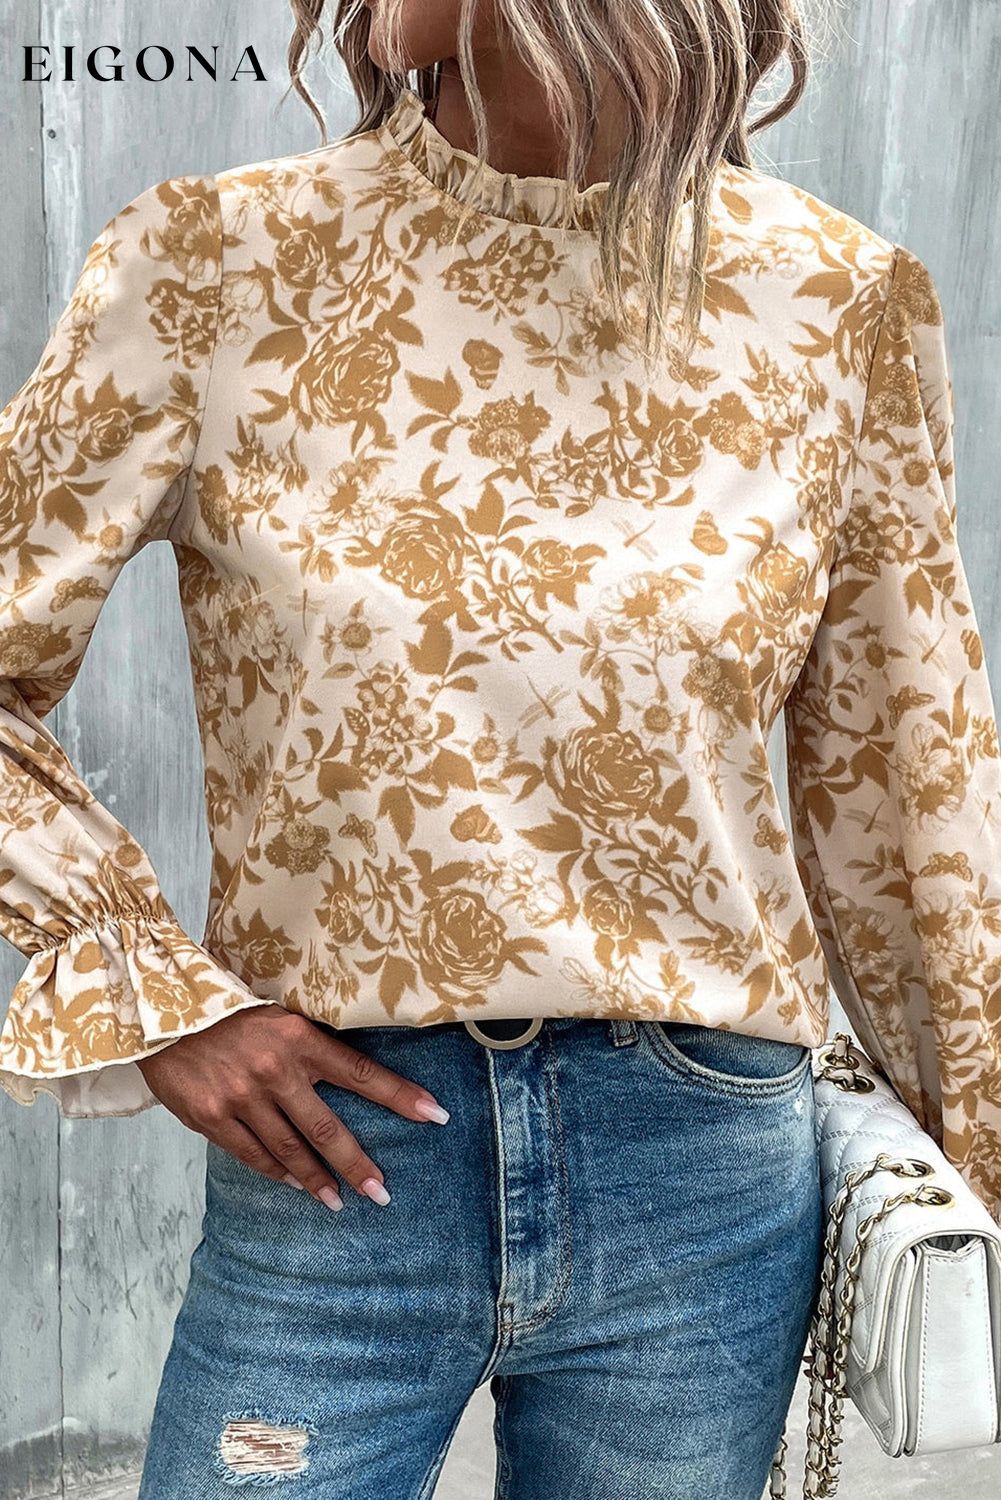 White Floral Print Frilled Neckline Flounce Sleeve Blouse clothes long sleeve shirt long sleeve shirts long sleeve top long sleeve tops shirt shirts top tops Tops/Blouses